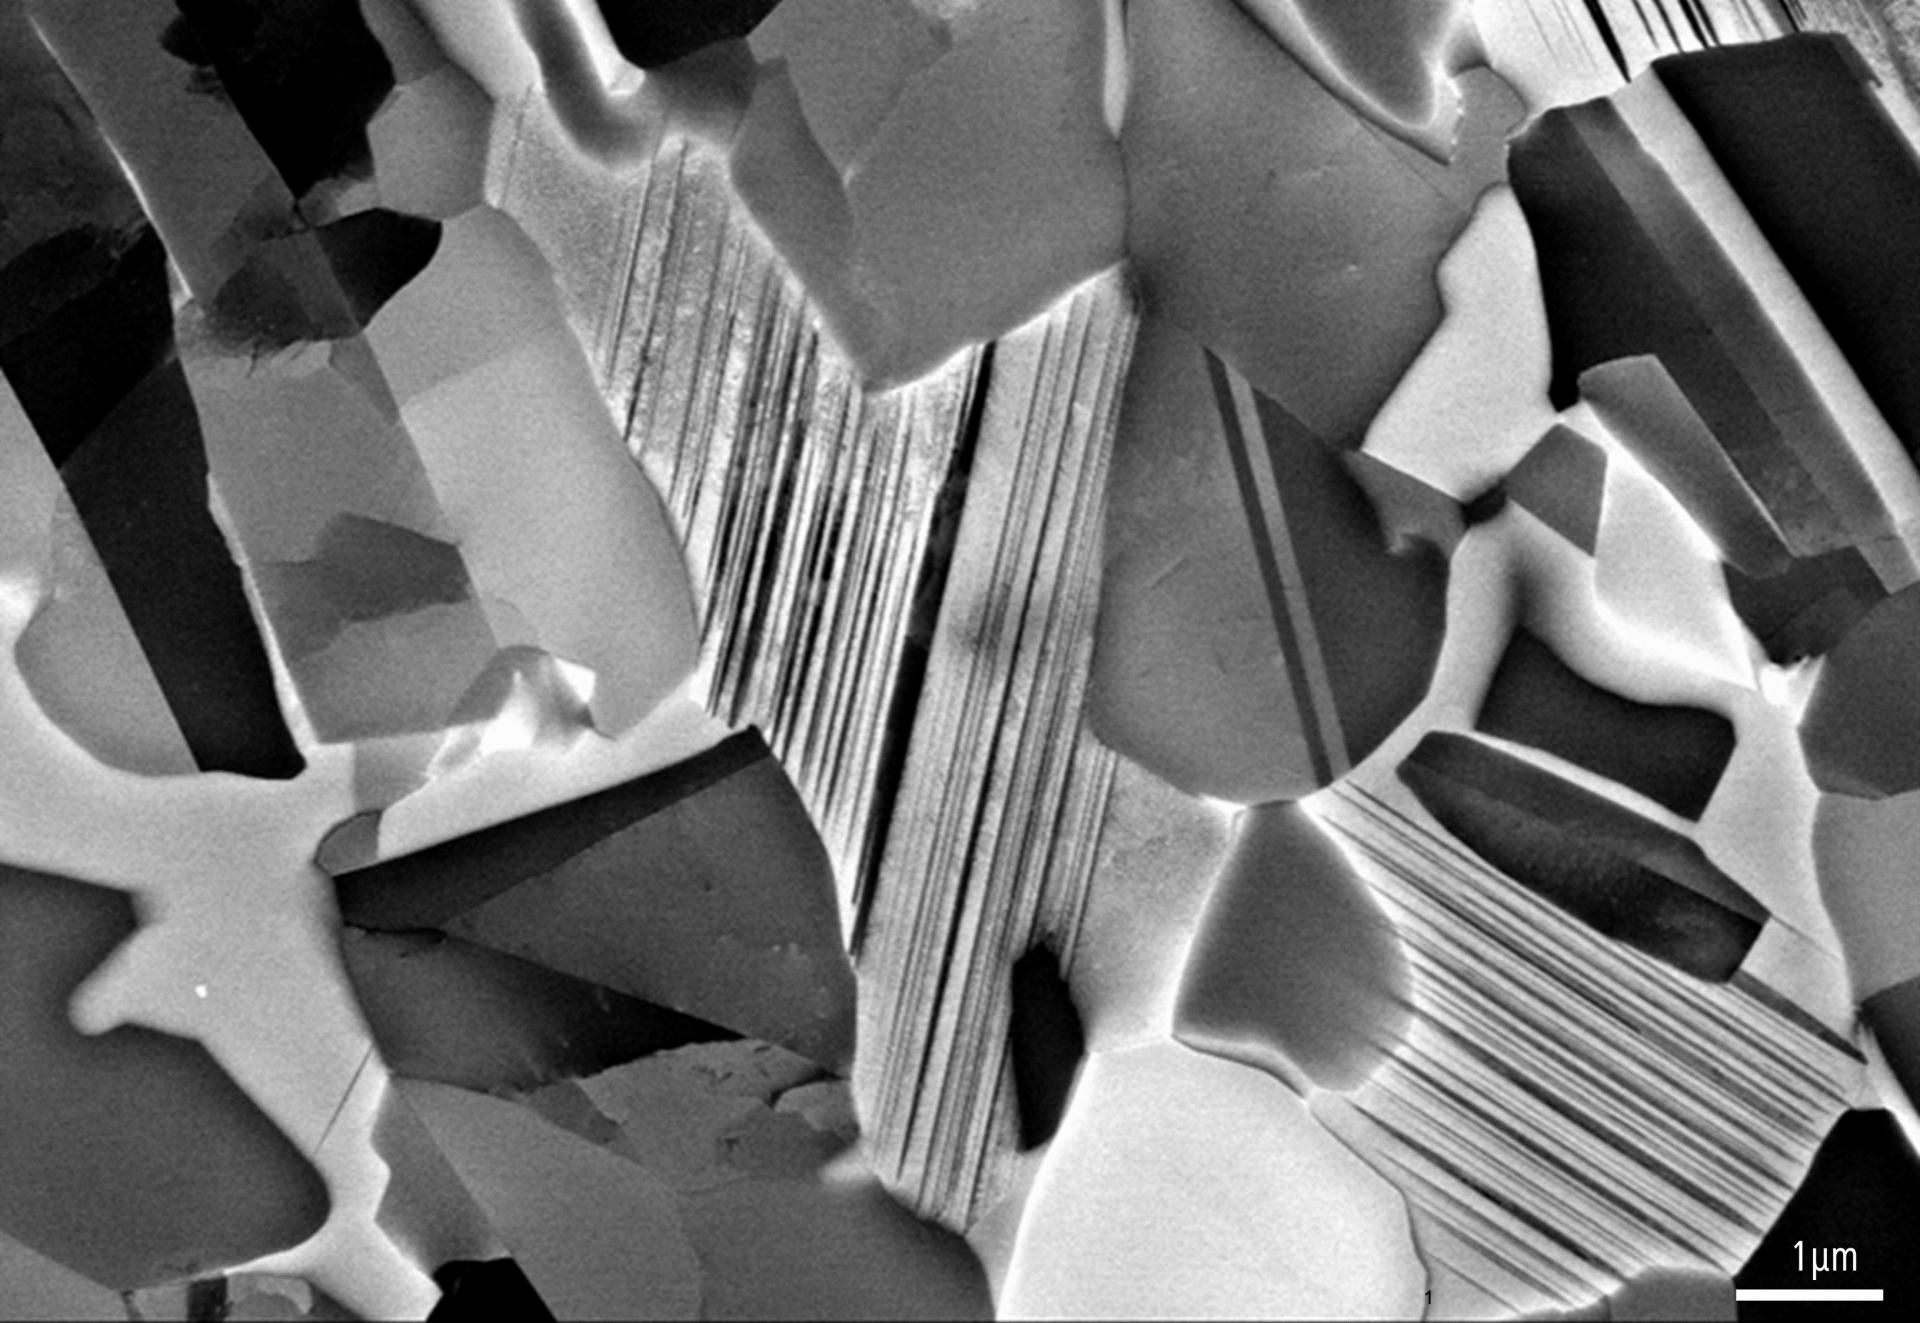 Scanning electron microscopy (SEM) delivers extremely high contrasts of crystal orientations and defects in the high temperature alloy TiAl₂.